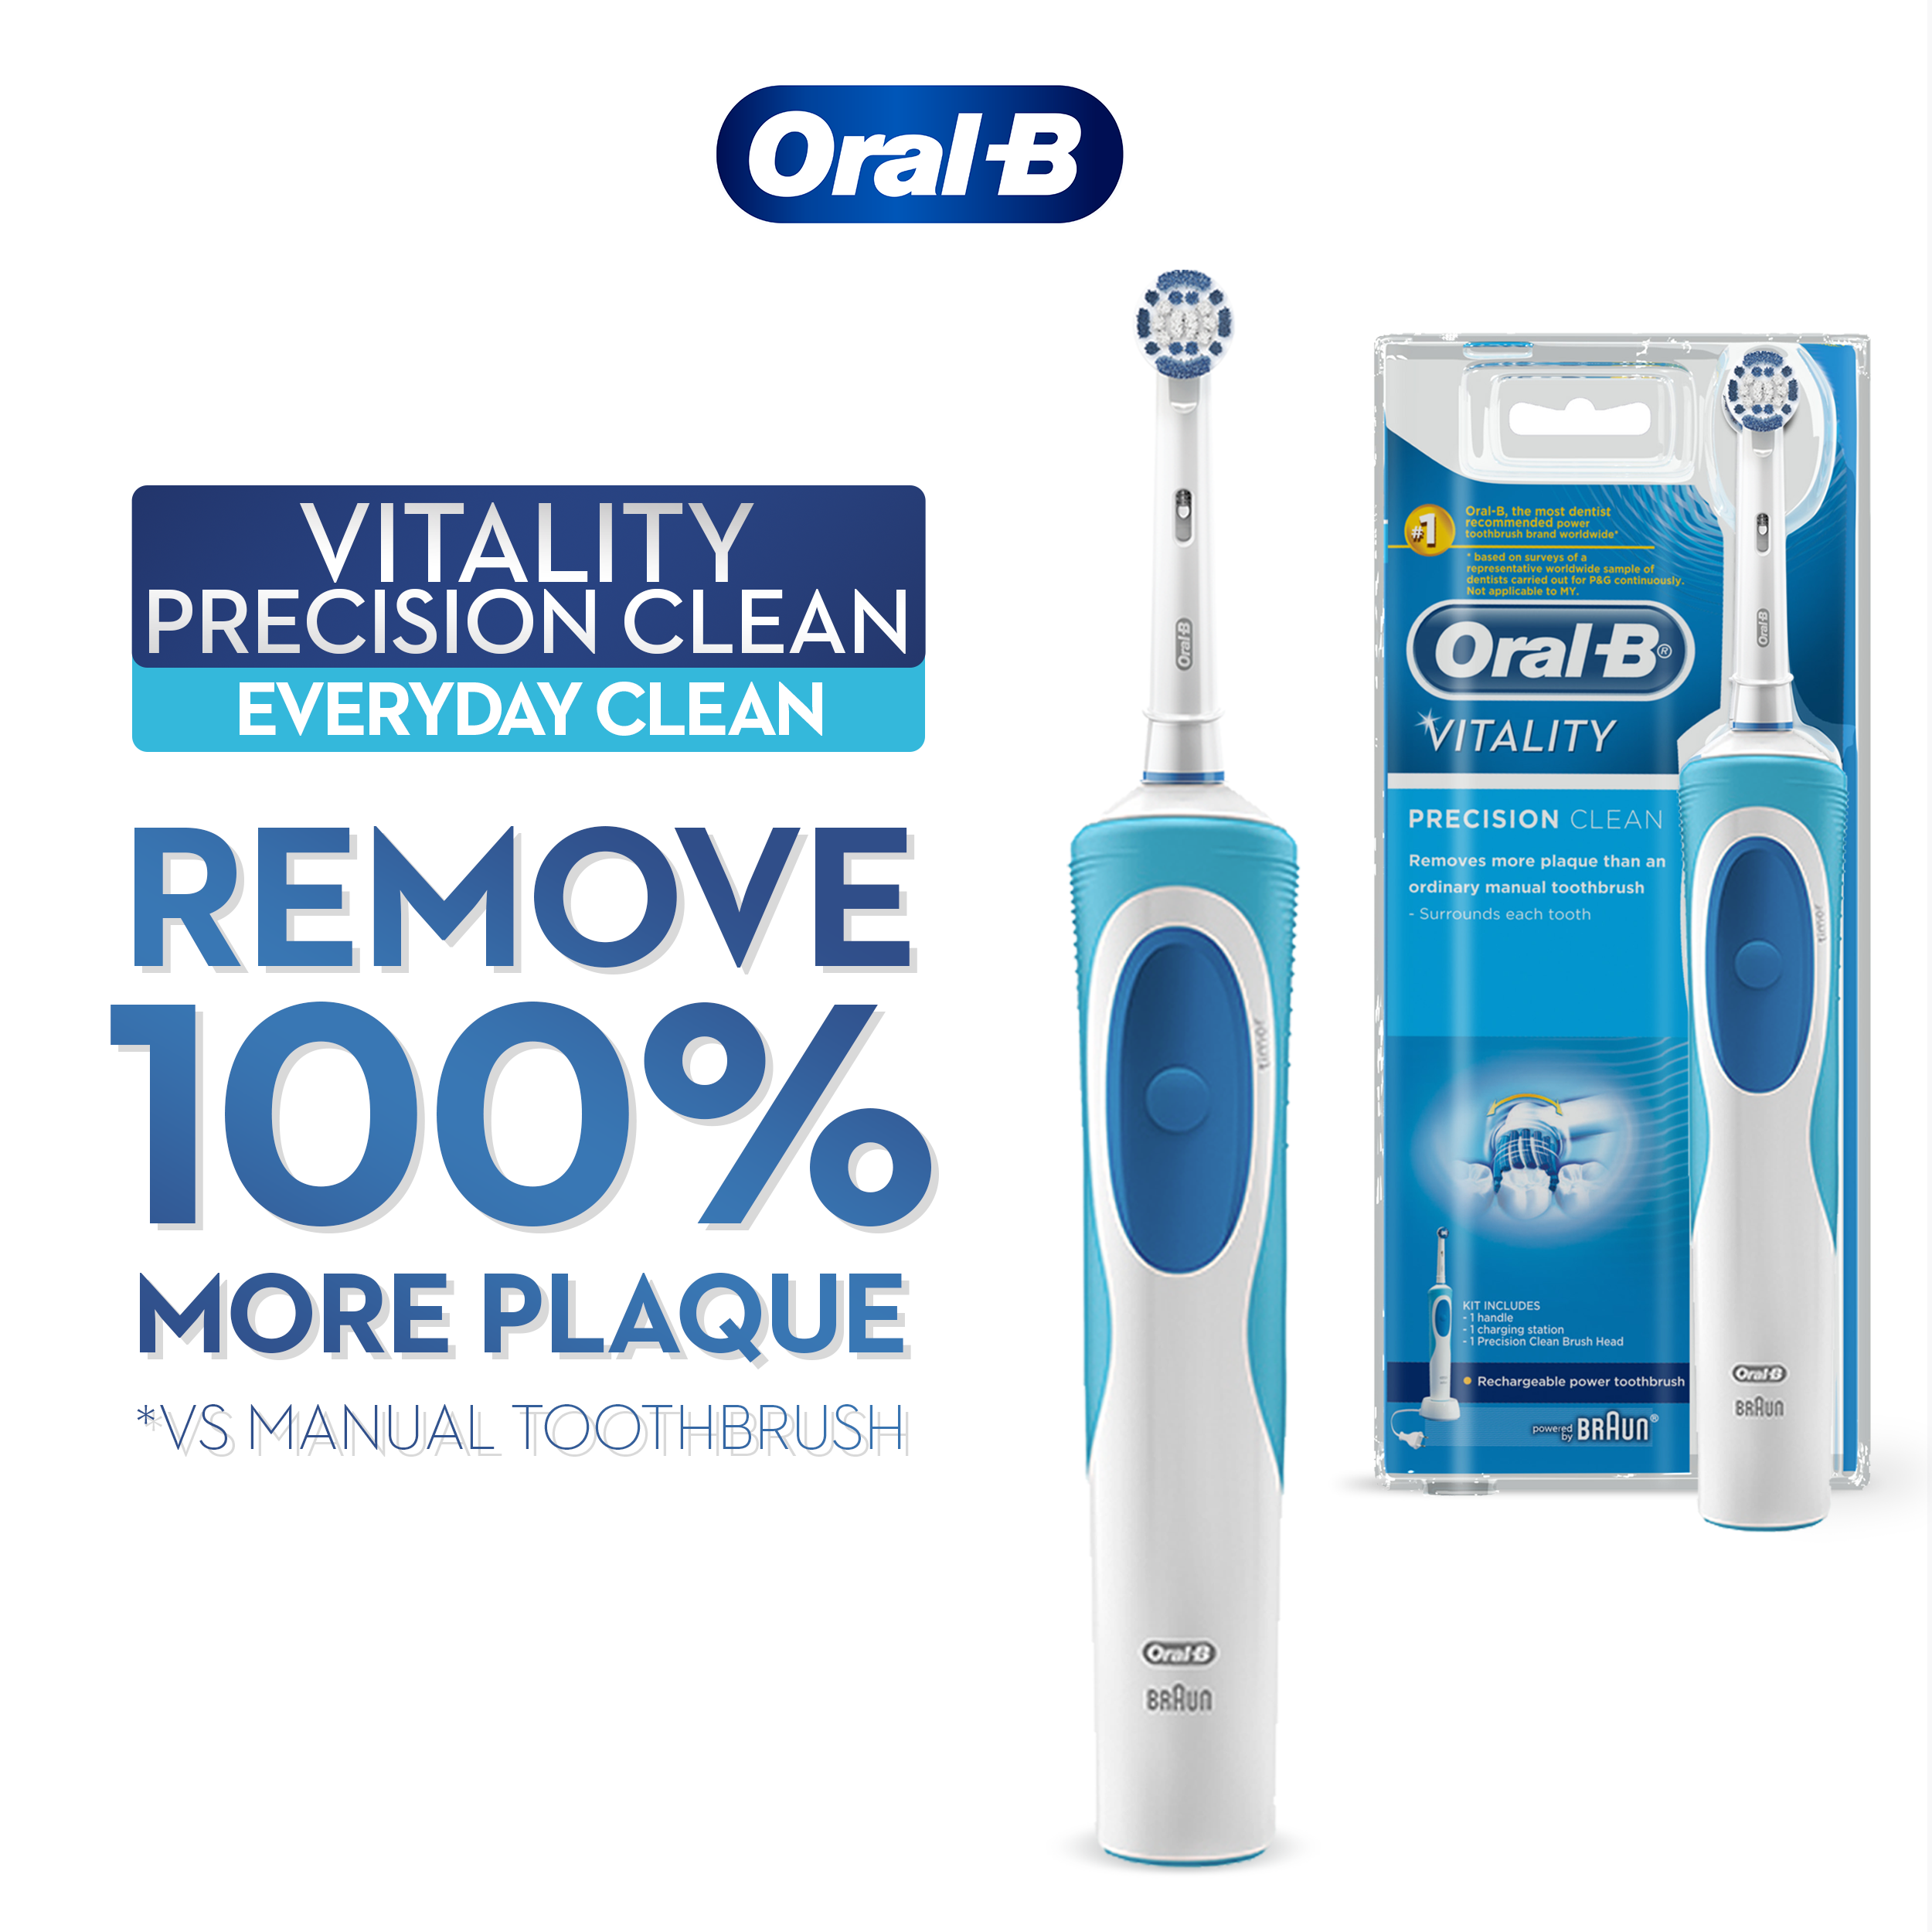 Oral-B Vitality Precision Clean Electric Toothbrush Powered by Braun